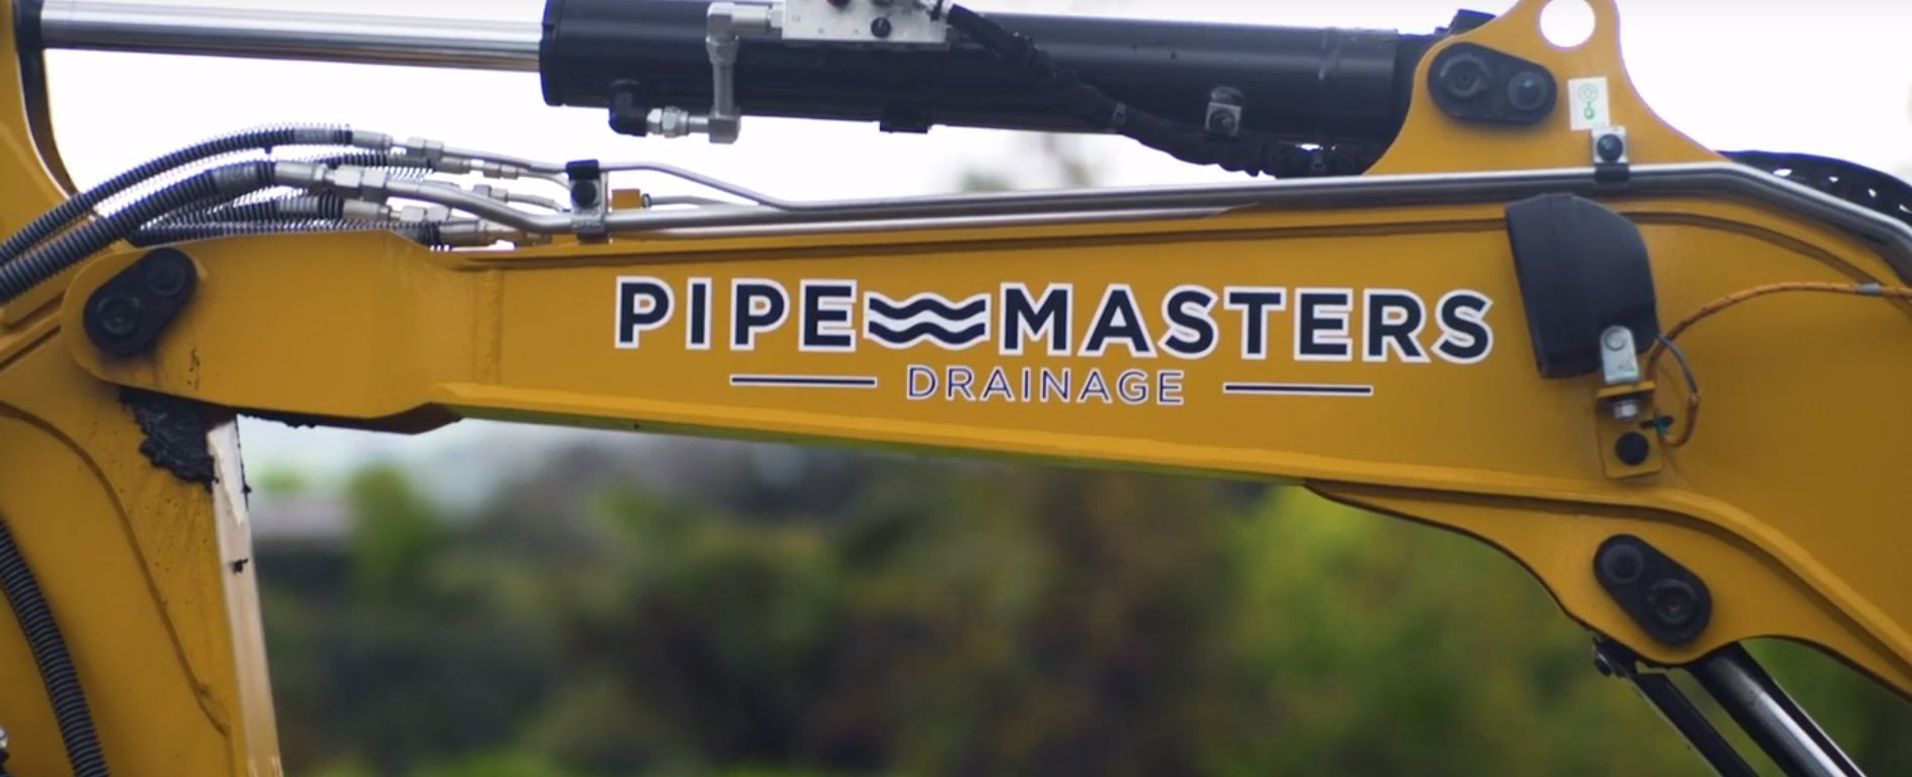 Pipe Masters Banner image